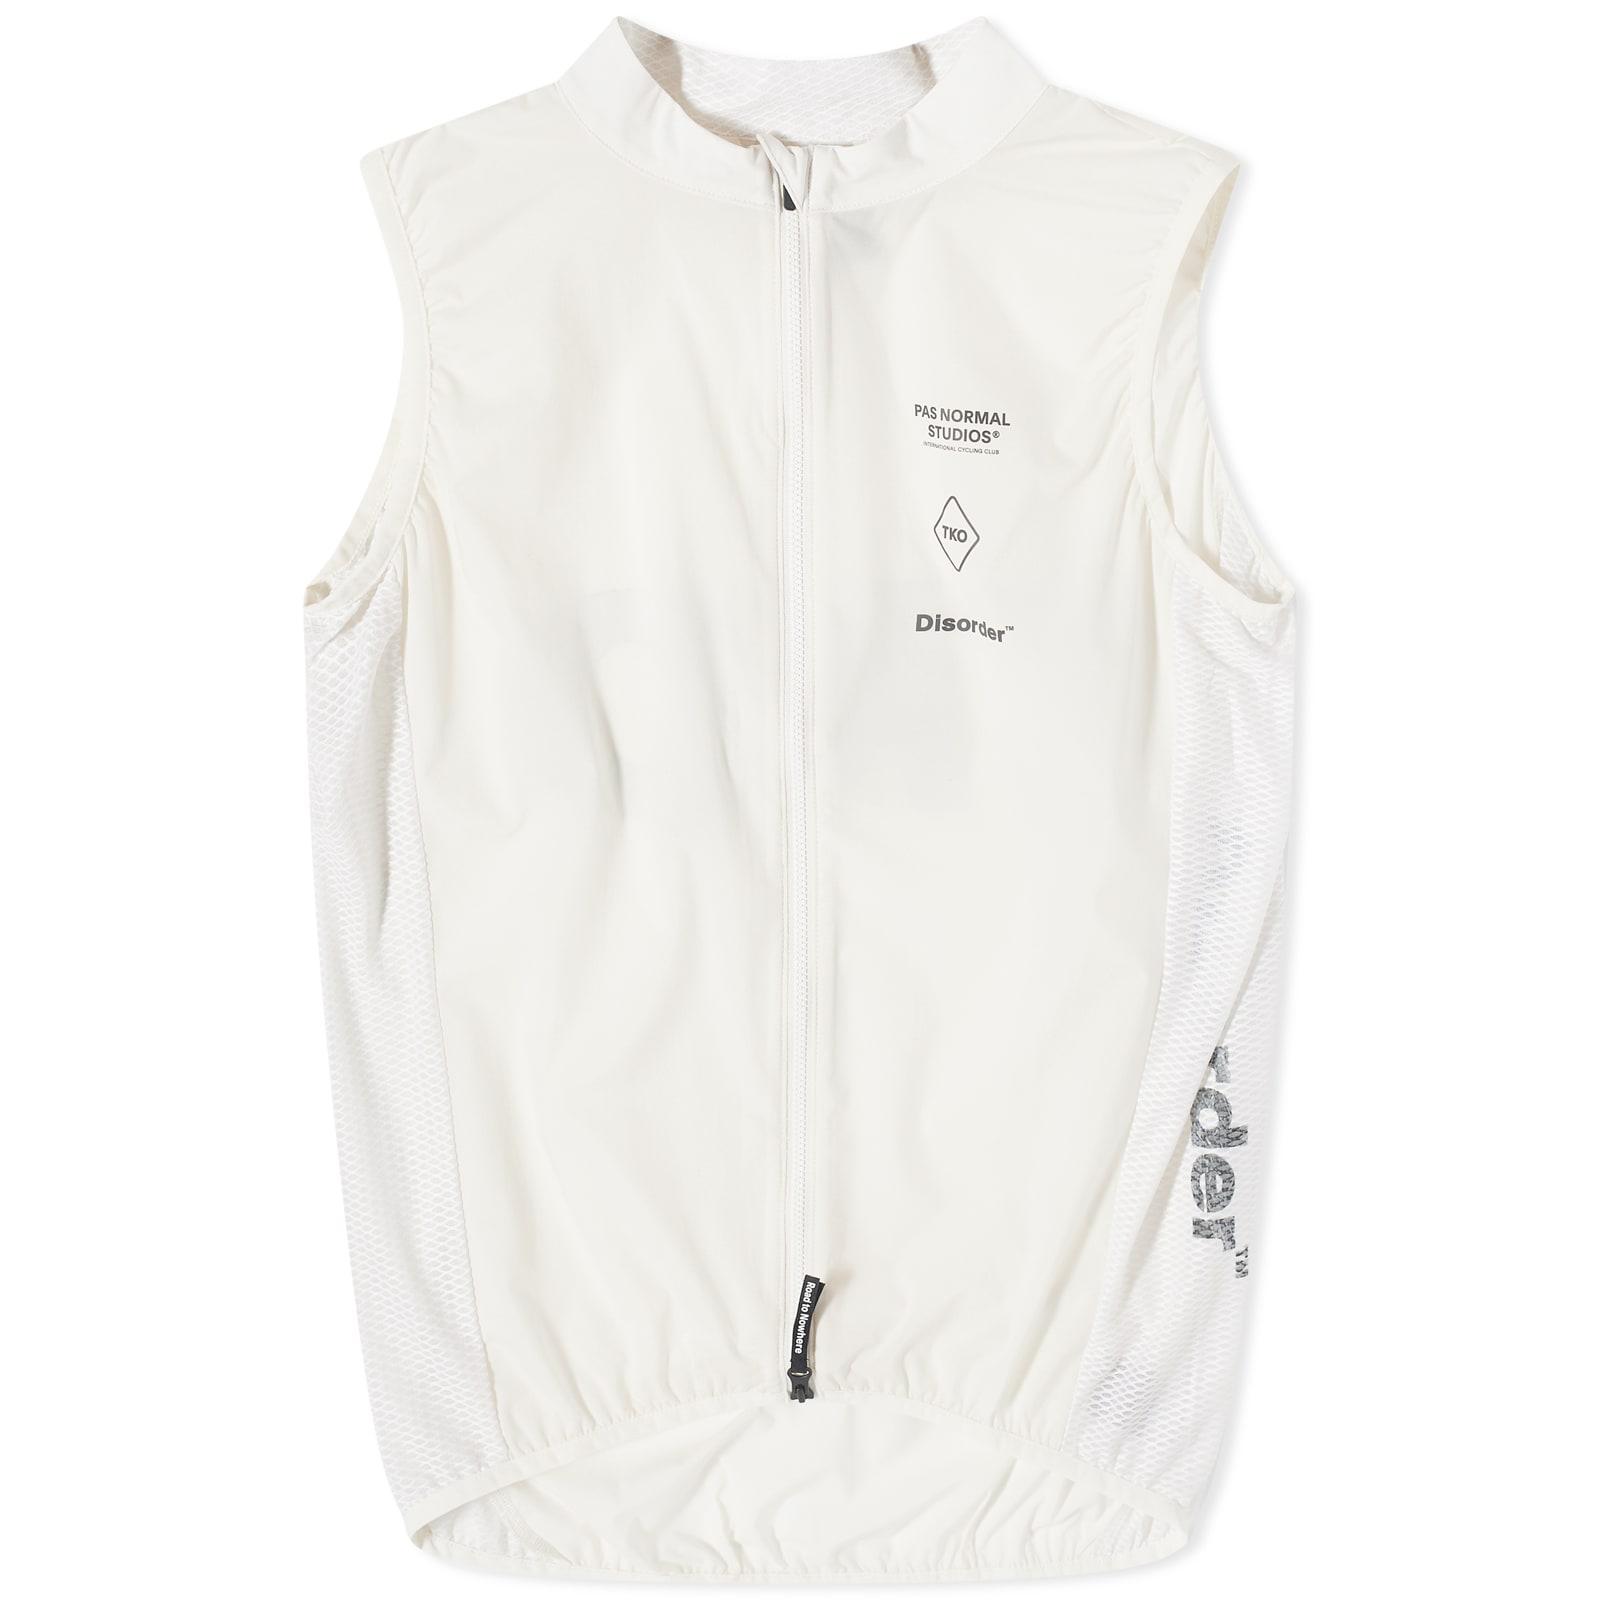 Pas Normal Studios X T.k.o. Mechanism Stow Away Gilet in White for 